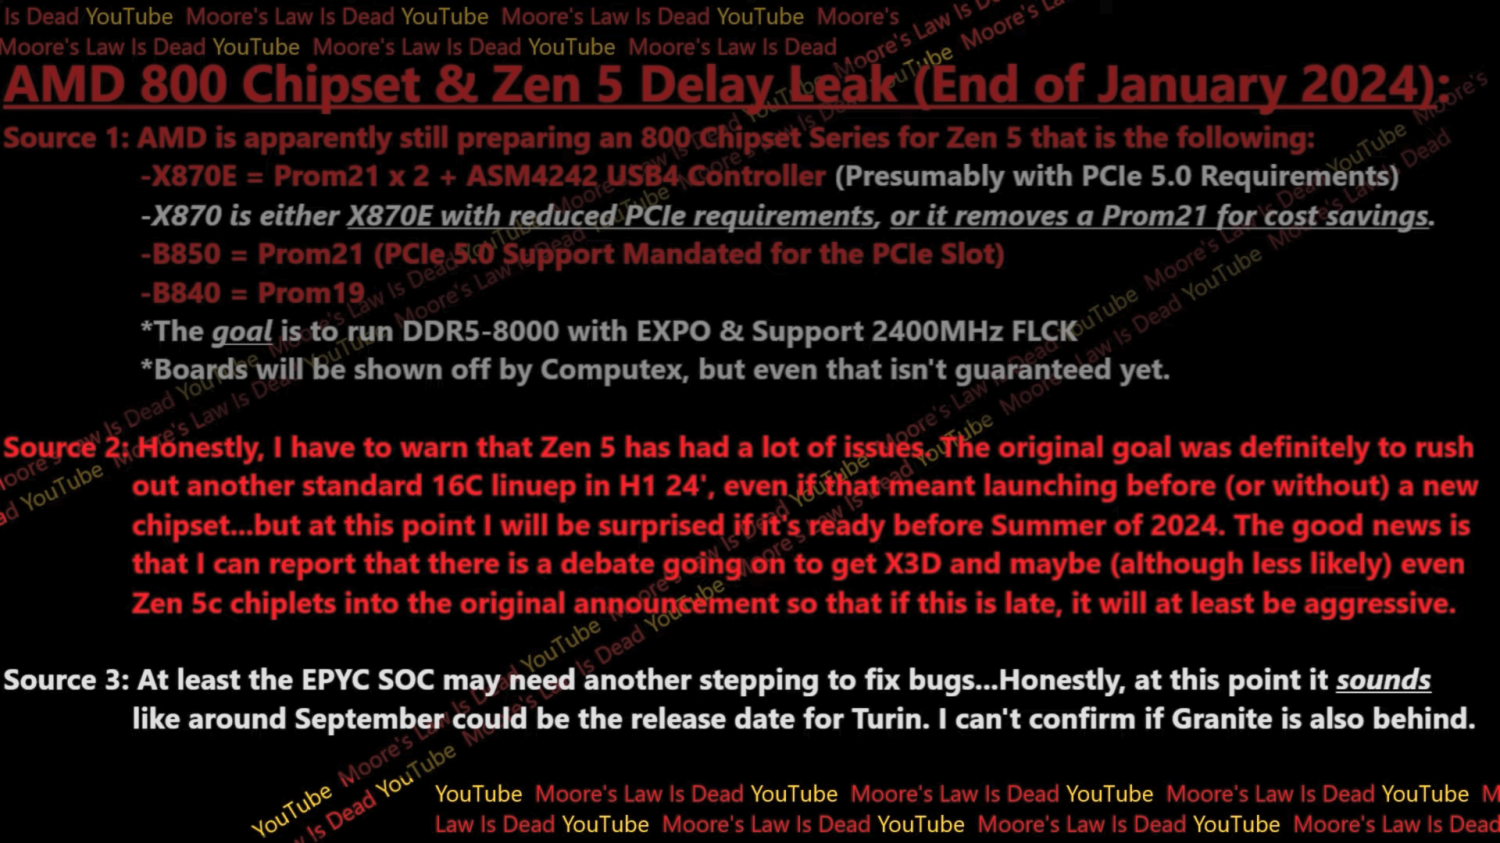 95922_06_amds-next-gen-zen-5-and-new-x870e-motherboard-detailed-leaked-expected-in-second-half-2024_full.png